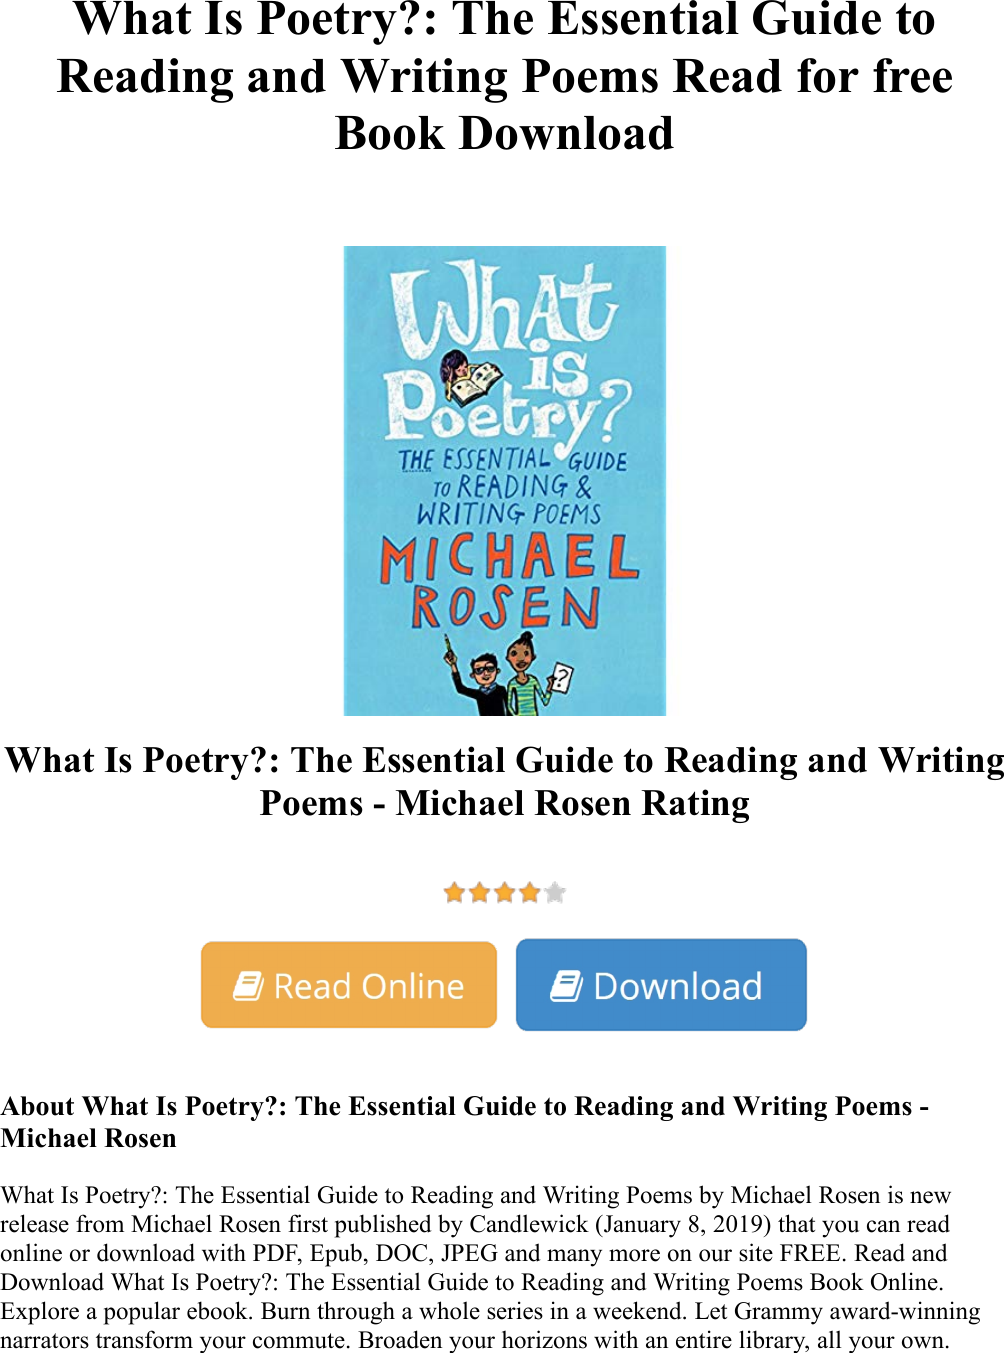 Page 1 of 2 - What Is Poetry?: The Essential Guide To Reading And Writing Poems - Michael Rosen Read For Free Book  What-Is-Poetry-The-Essential-Guide-to-Reading-and-Writing-Poems